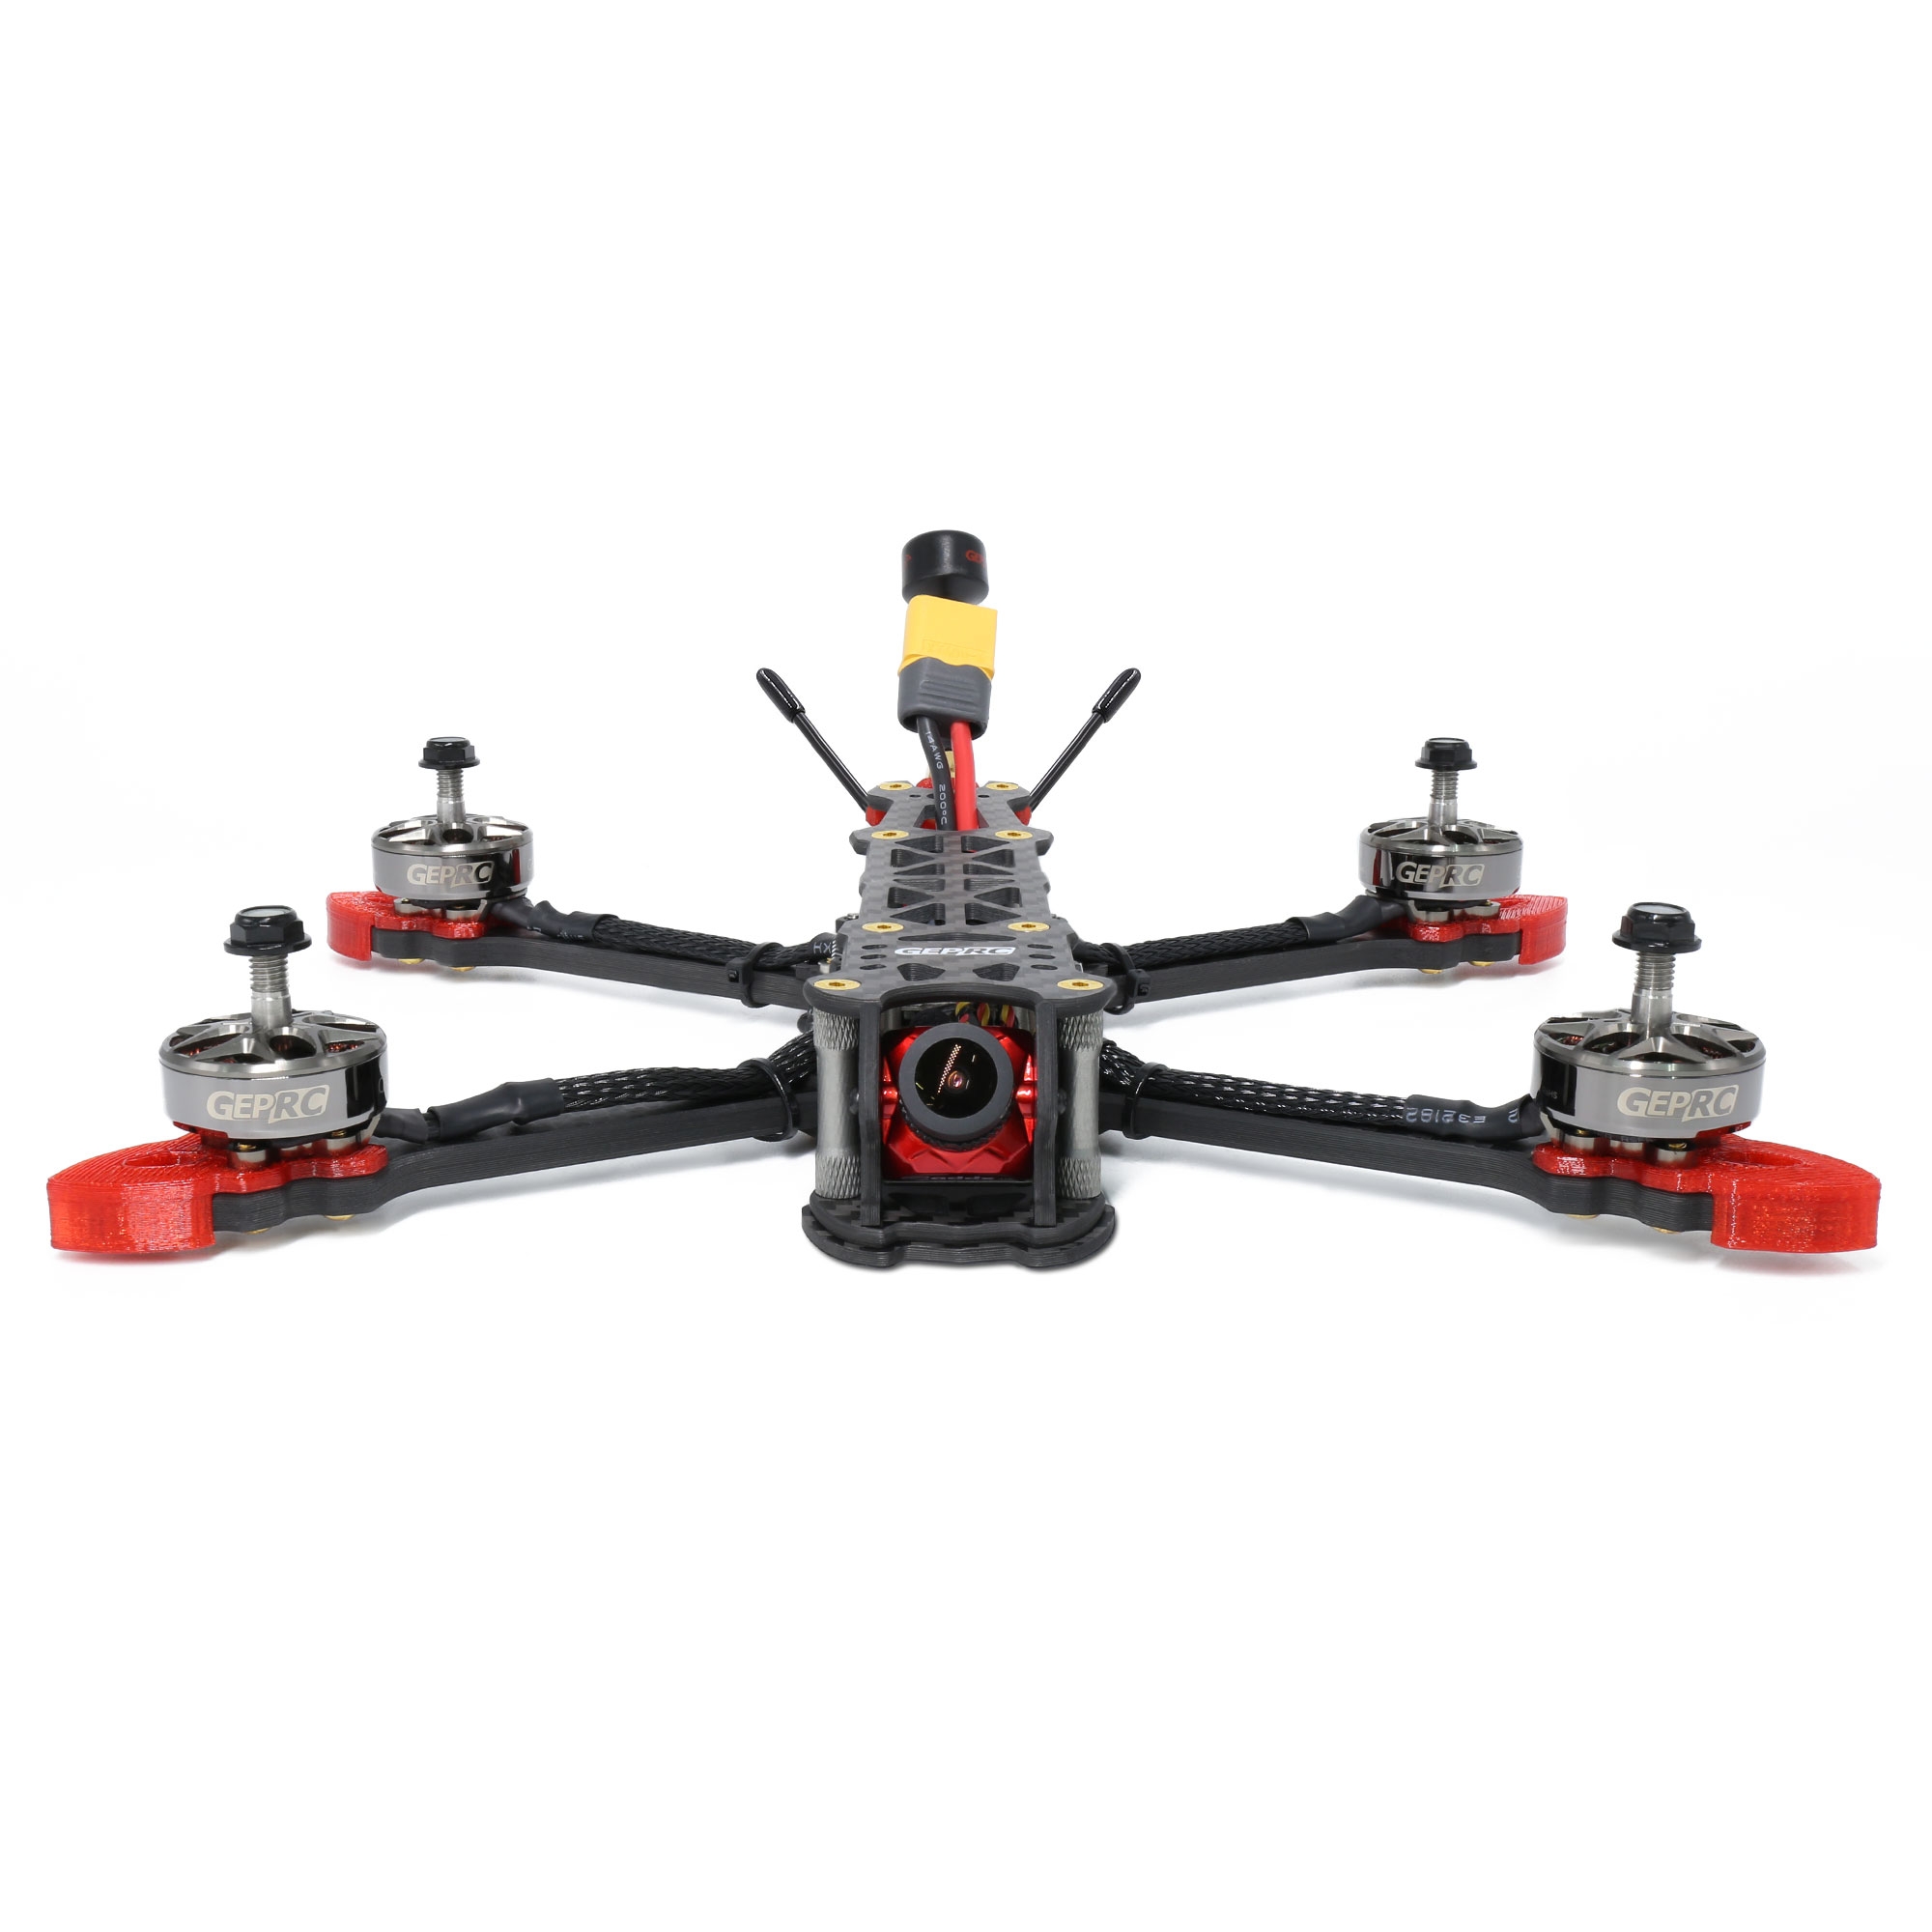 GEPRC MARK4 5 Inch 225mm 4S FPV Racing Drone Freestyle PNP/BNF 2306.5 2450KV SPAN F4 BLheli_S 45A Tower Caddx Ratel Camera